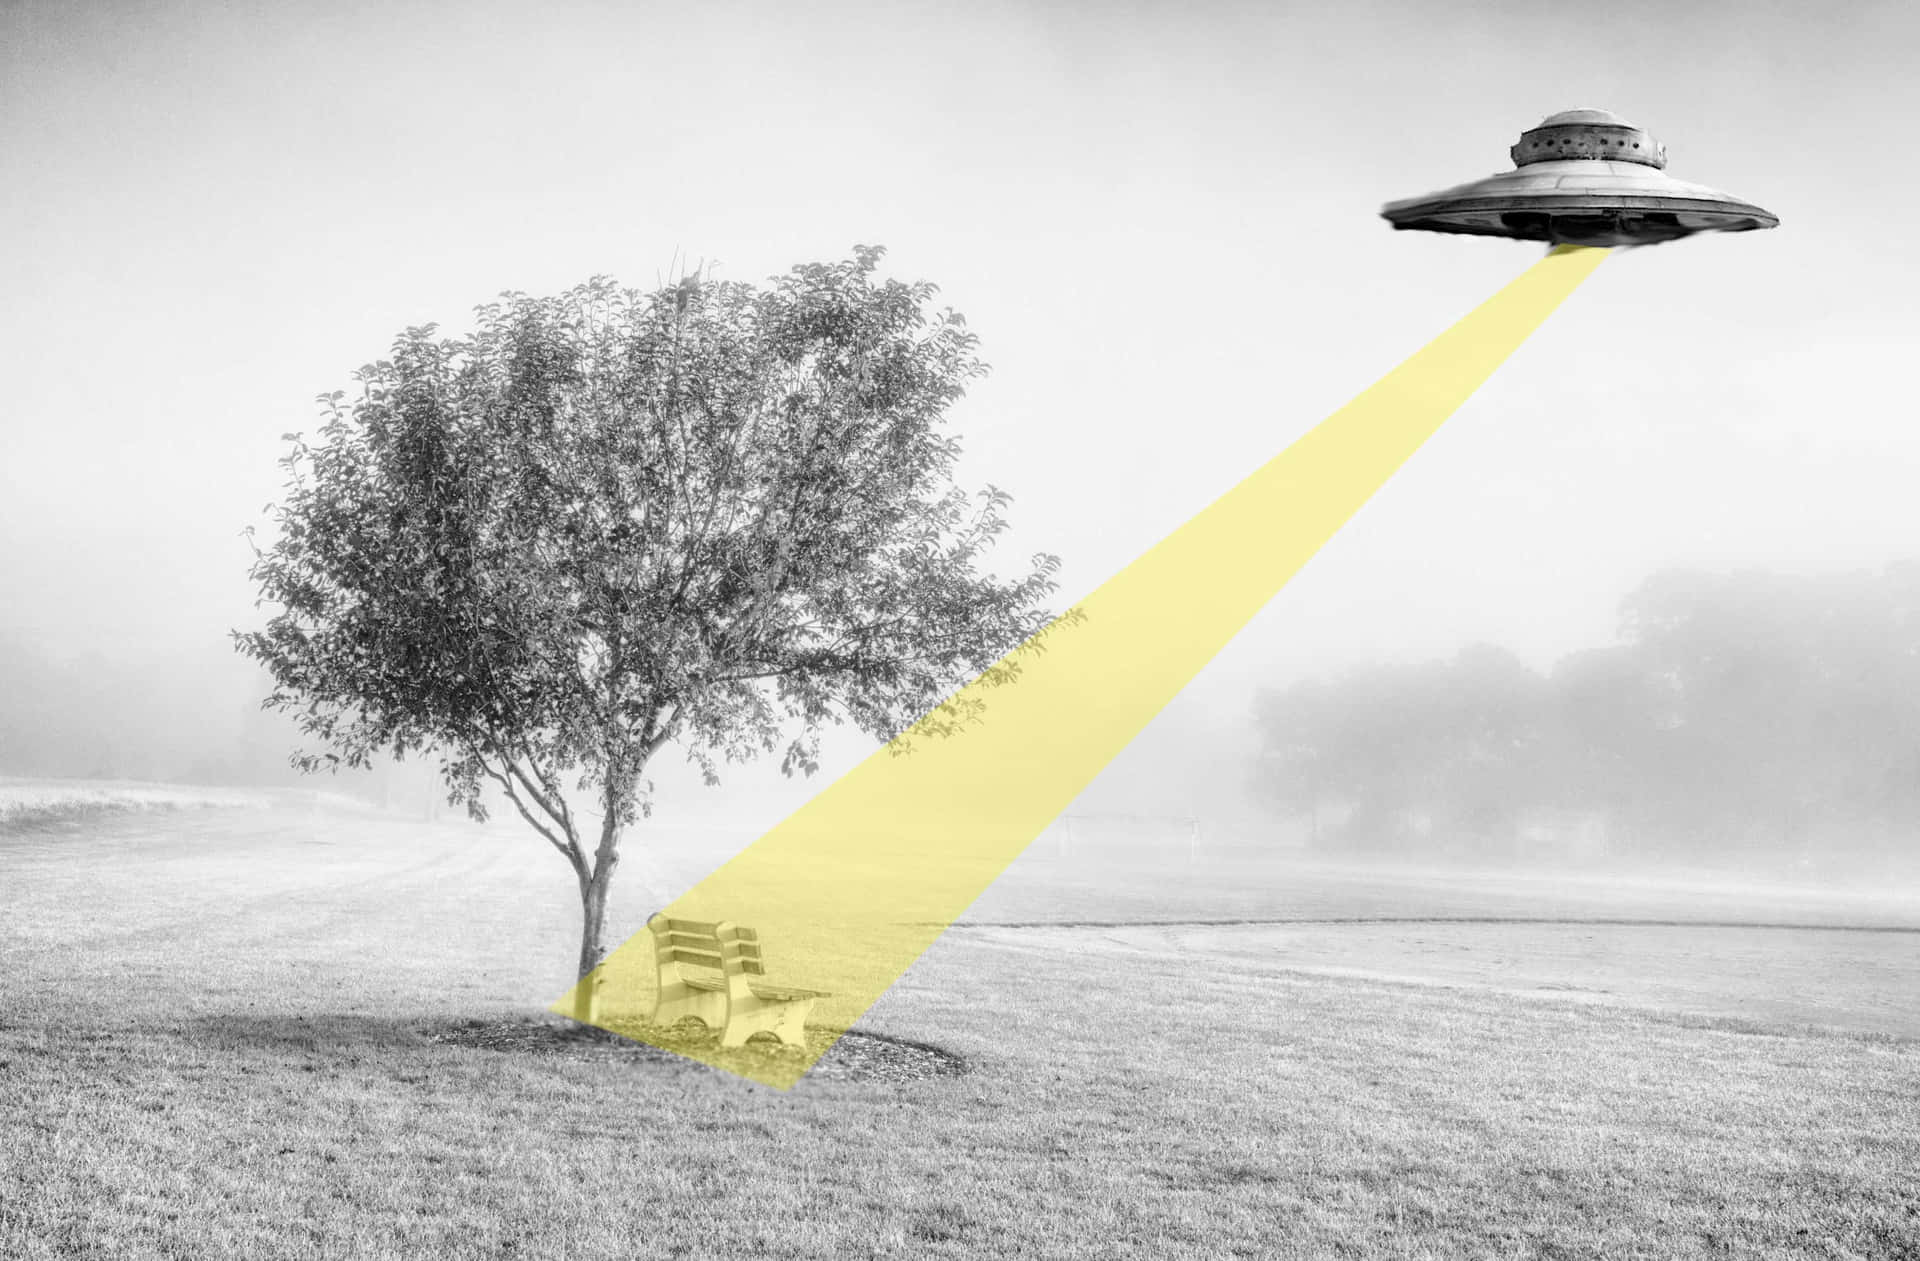 A UFO hovering in the night sky above a rural landscape